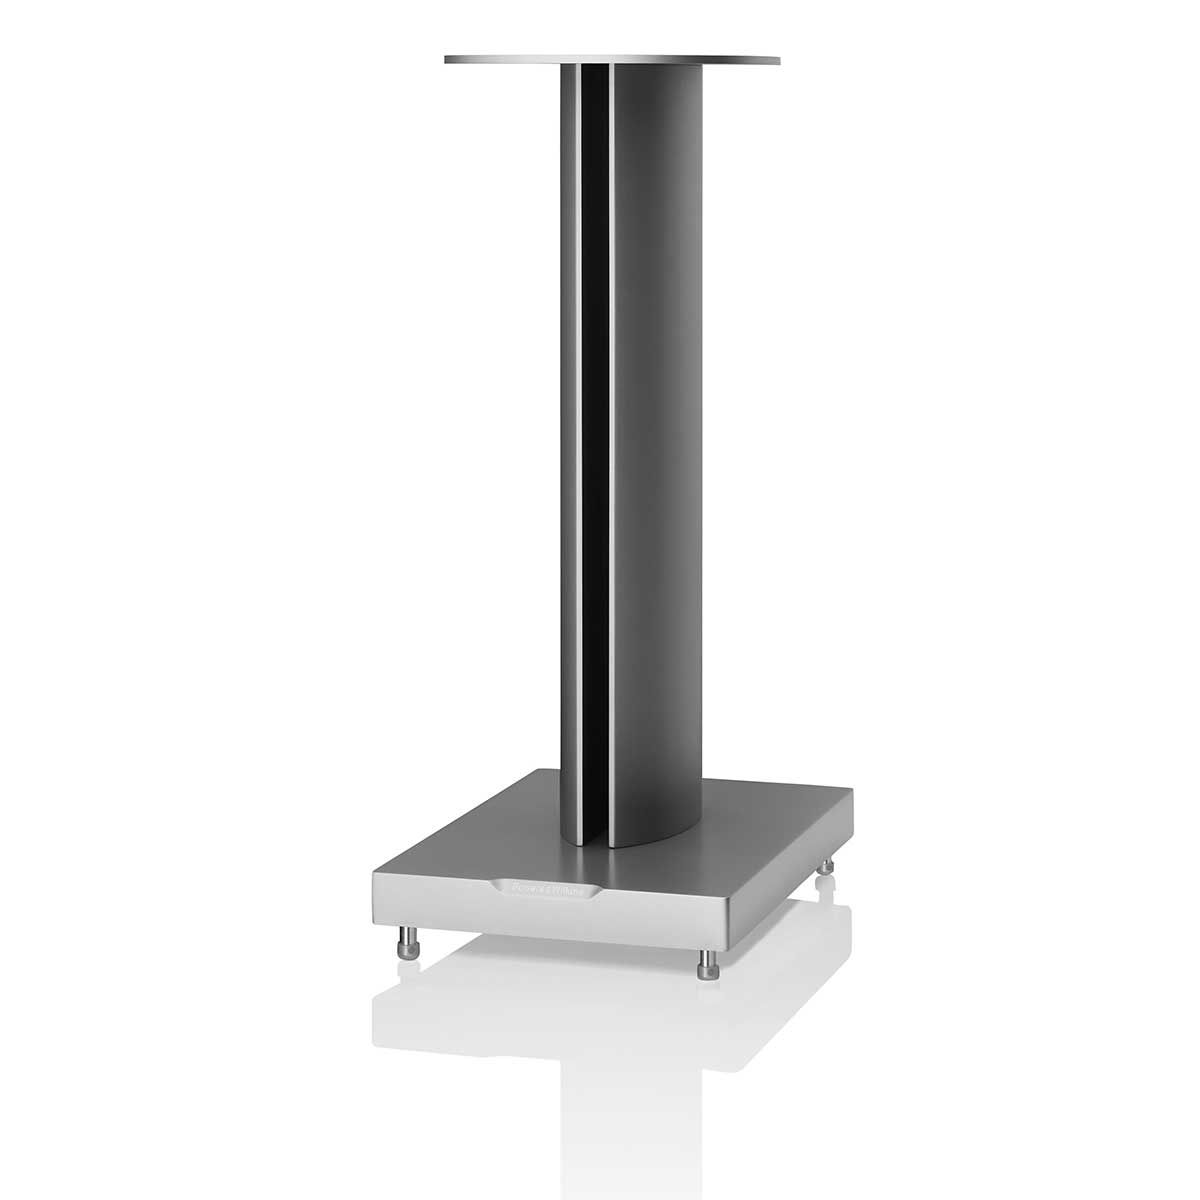 Bowers & Wilkins FS-805 D4 Bookshelf Speaker Stand, Silver, front angle